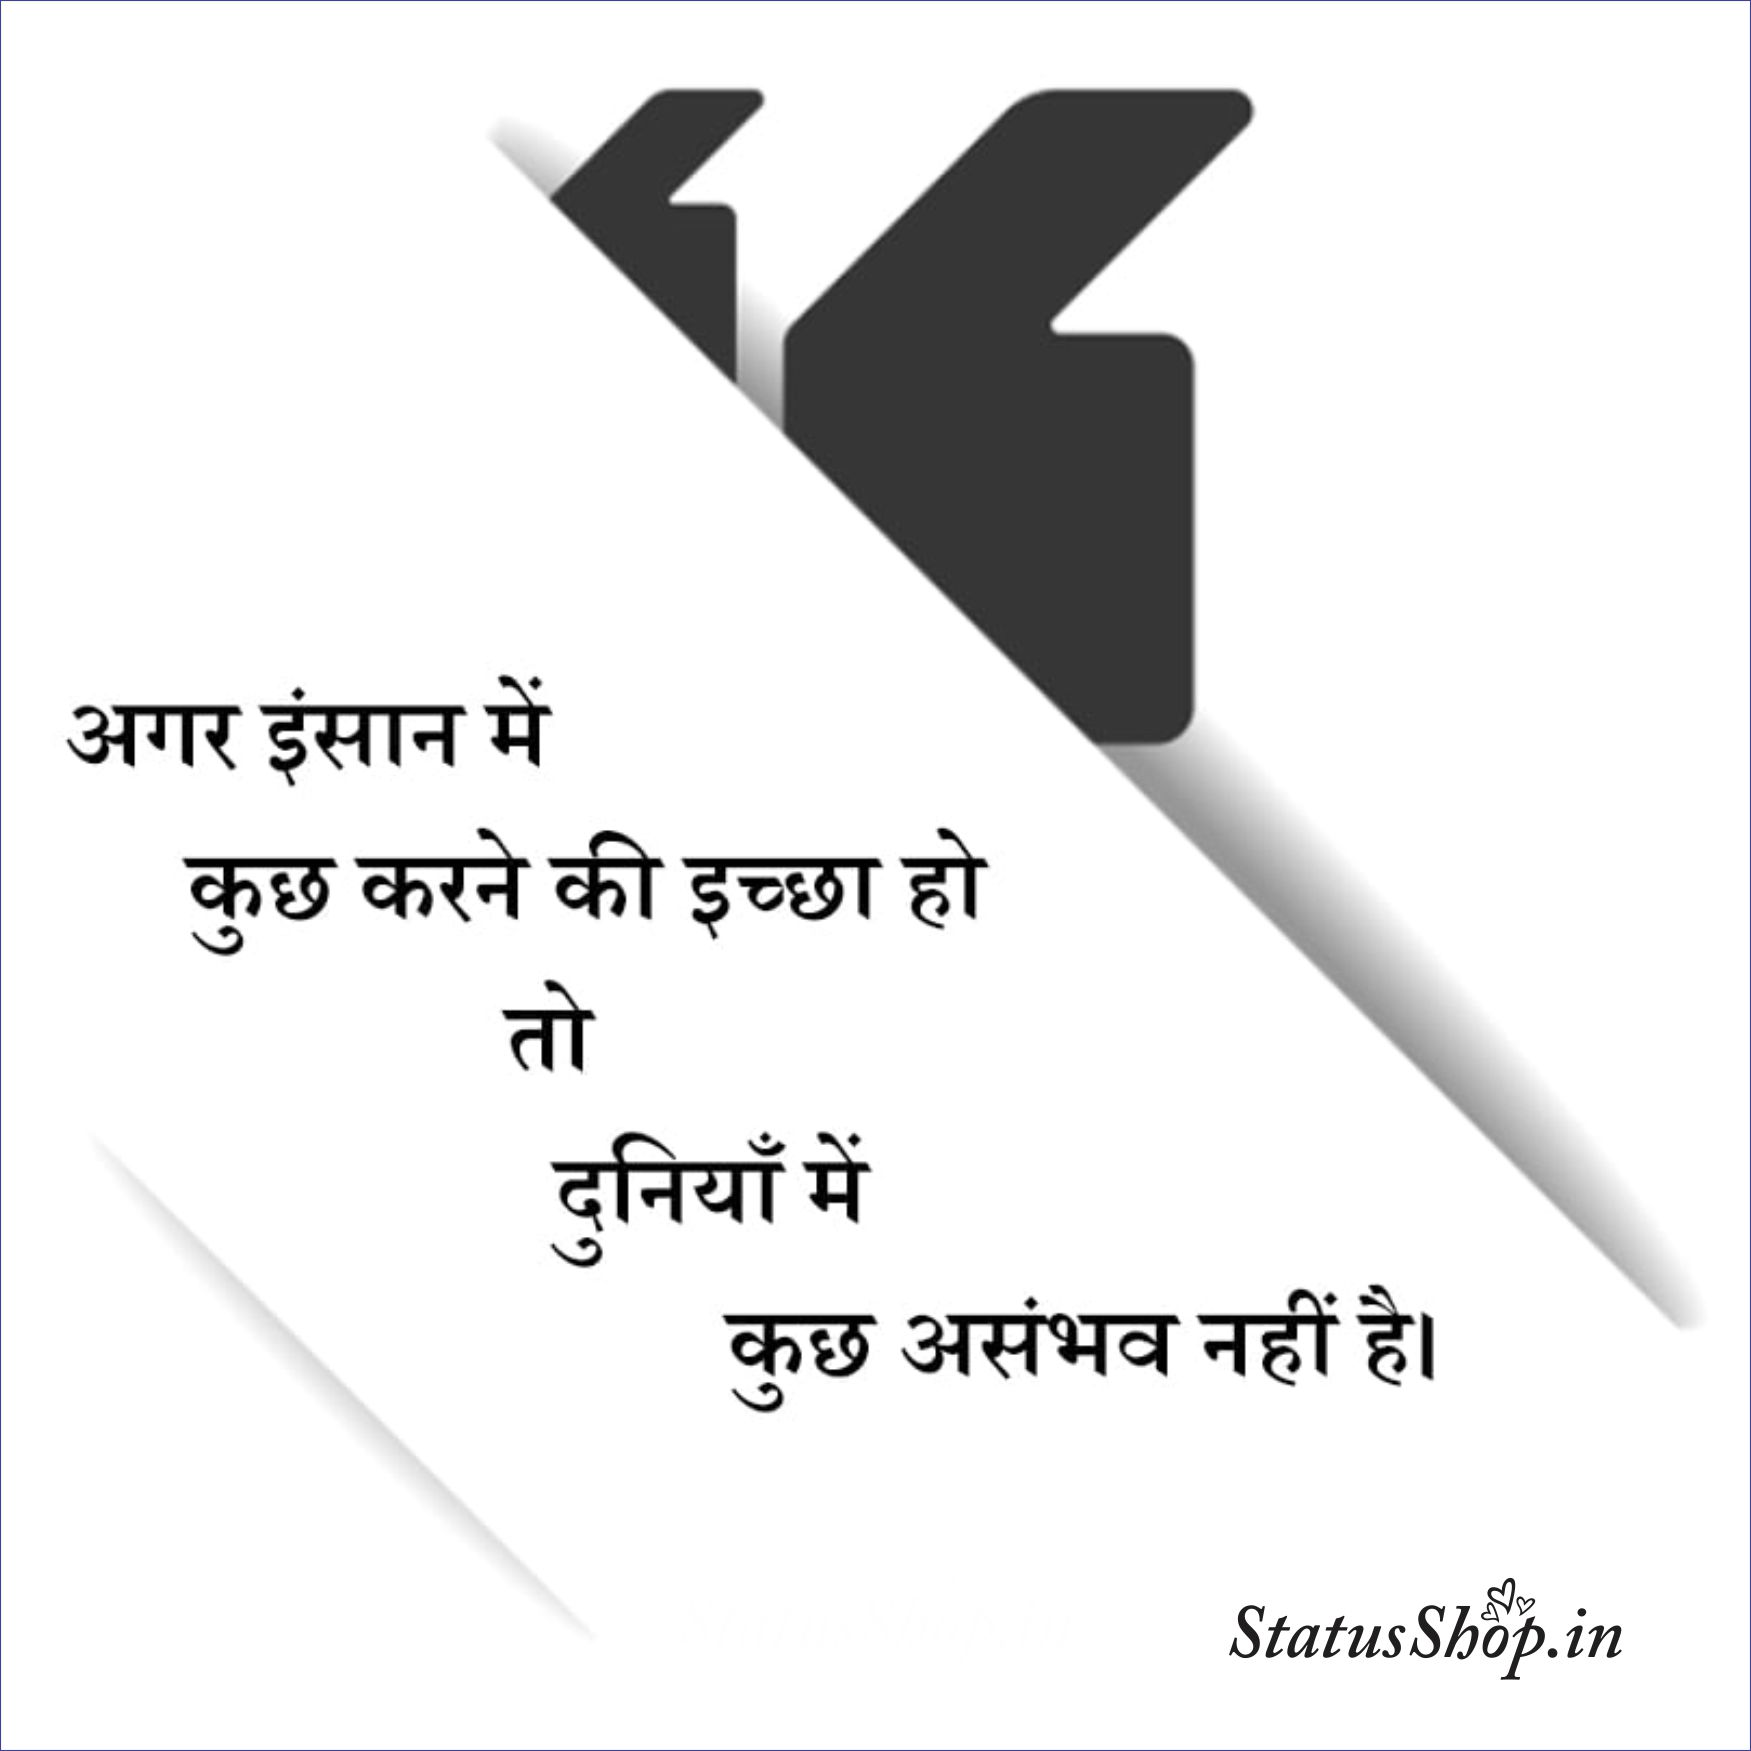 Success-Motivational-Quotes-In-Hindi